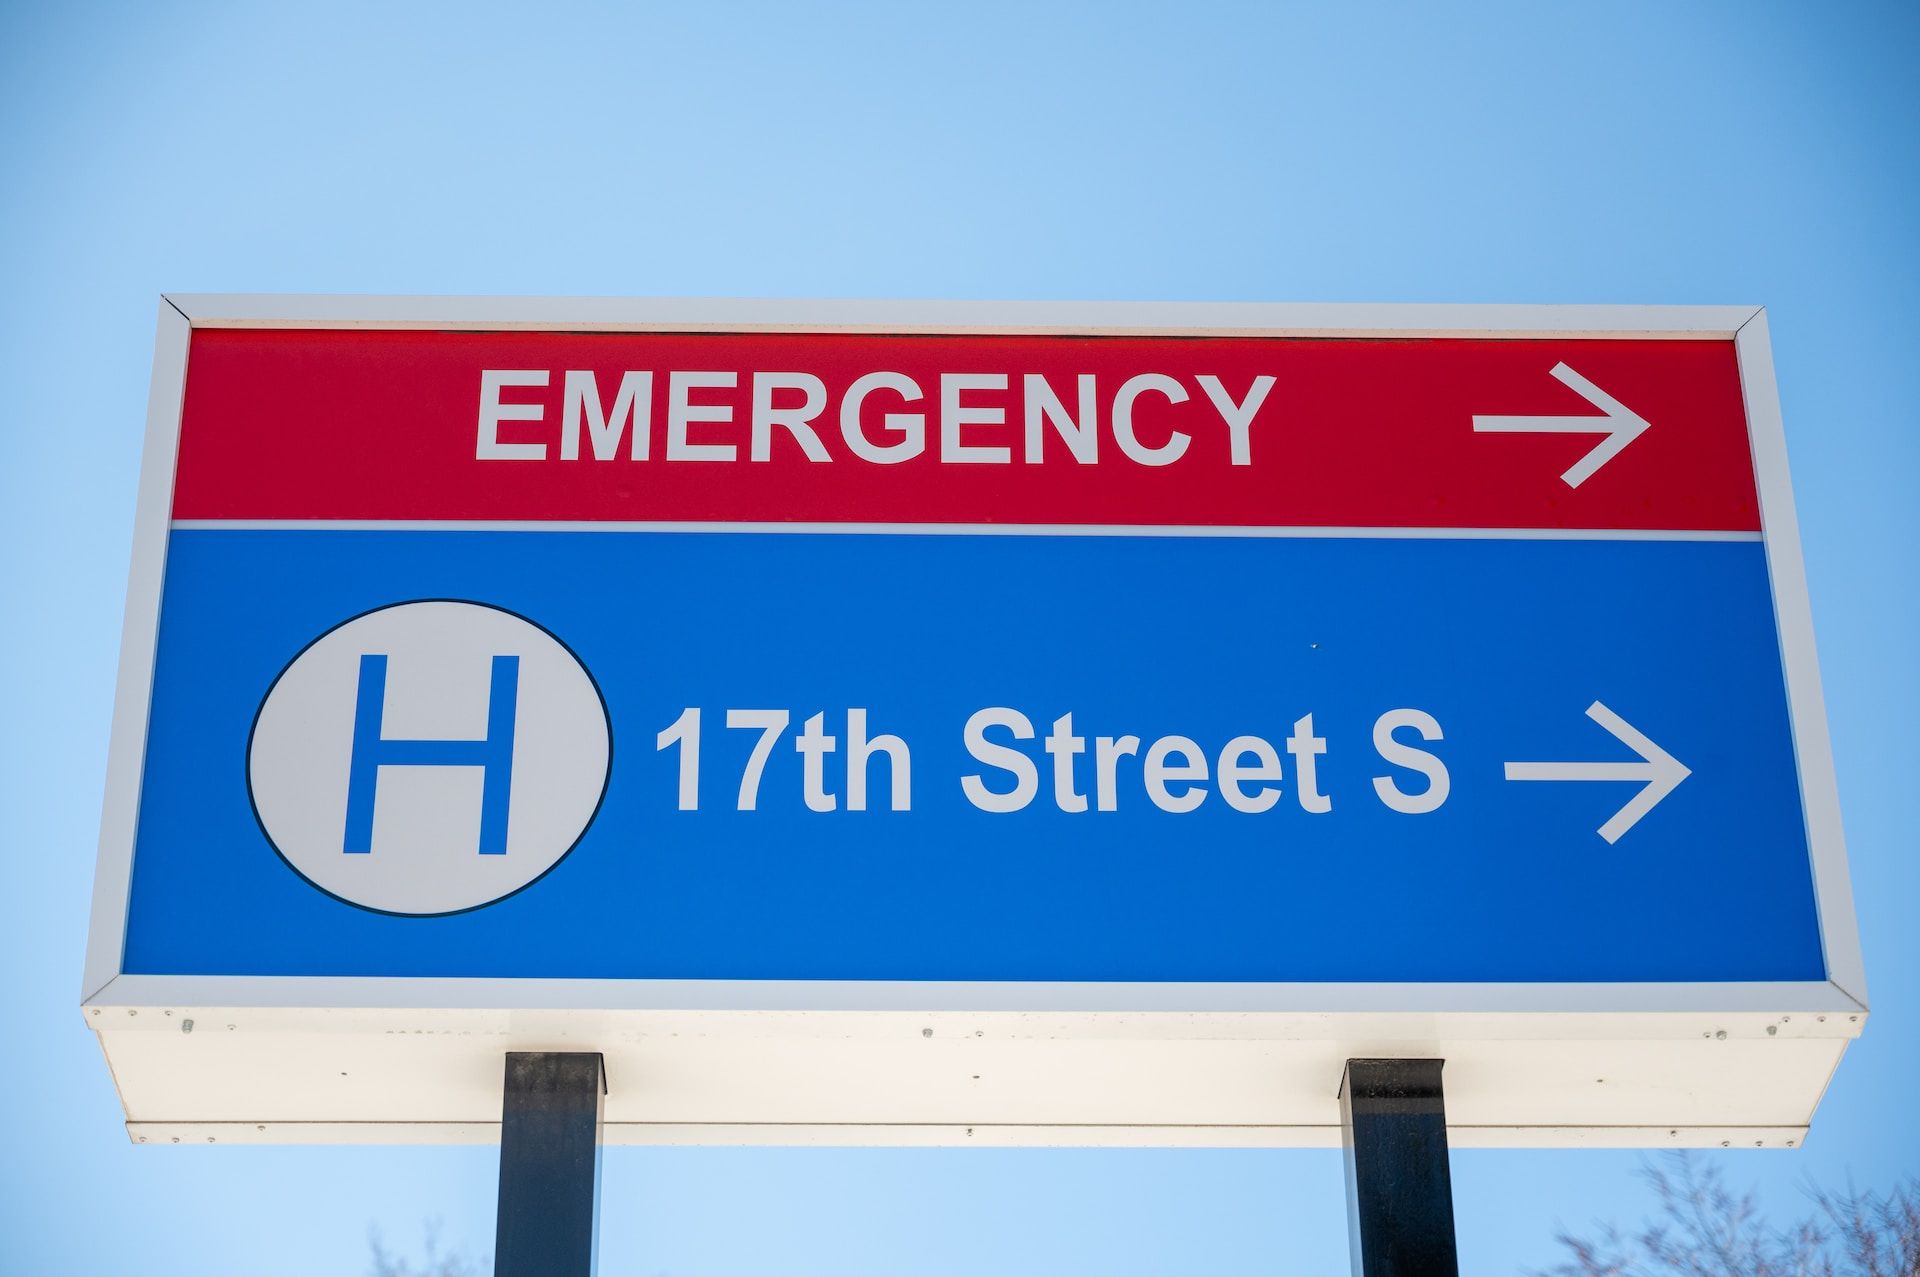 A sign pointing towards the Emergency Department of a Hospital